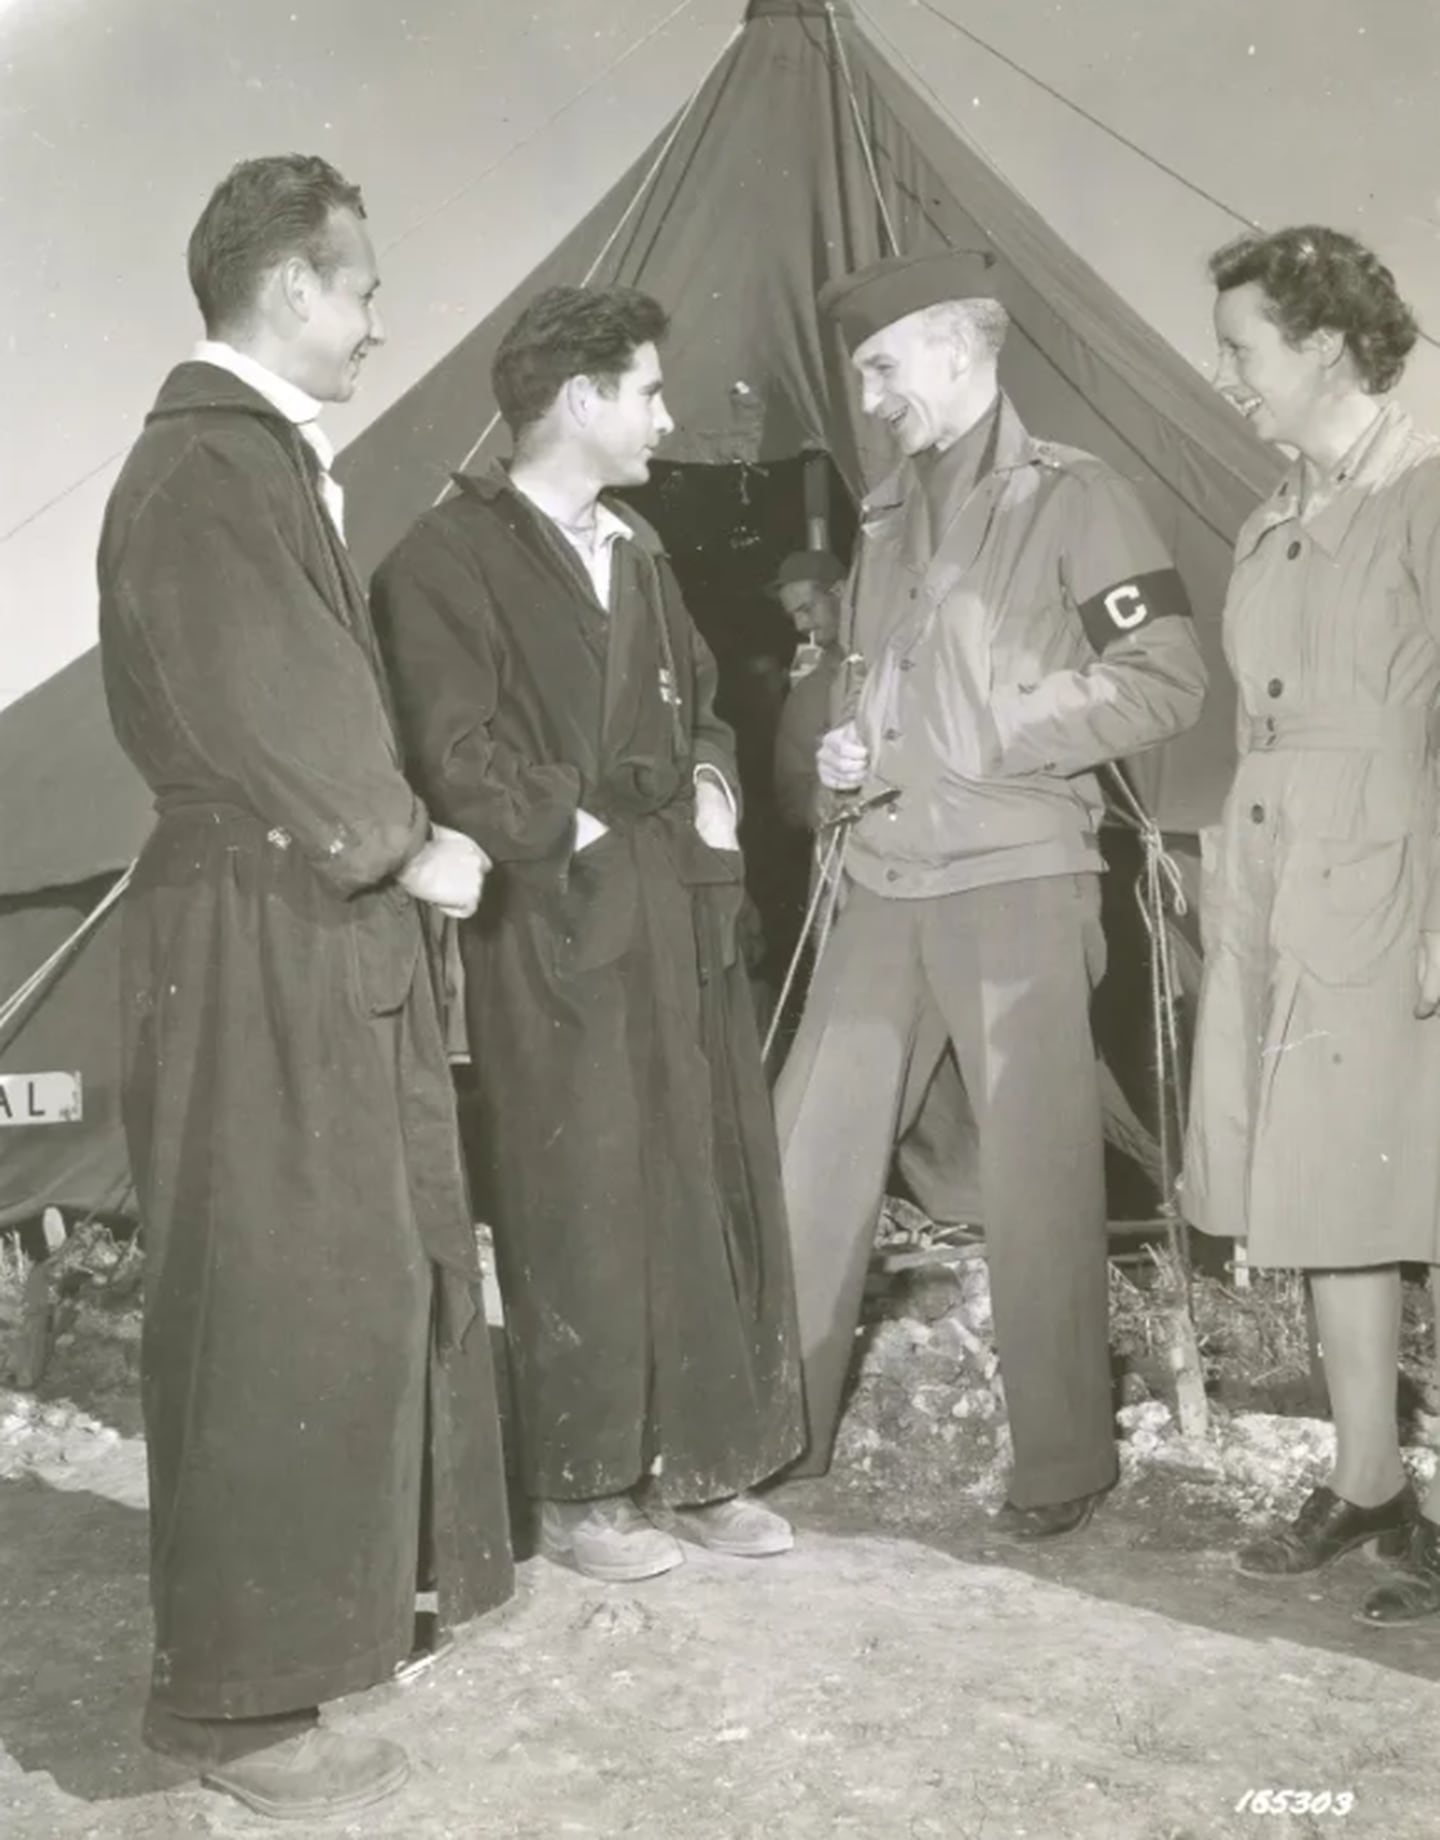 Ernie Pyle, of Scripps-Howard Newspapers, interviews Sgt. Ralph Gower of Sacramento, California; Pvt. Raymond Astrackon (left) of New York City; and 2nd. Lt. Annette Heaton of Detroit, Michigan, attached to an evacuation hospital on Dec. 2, 1942, in North Africa.